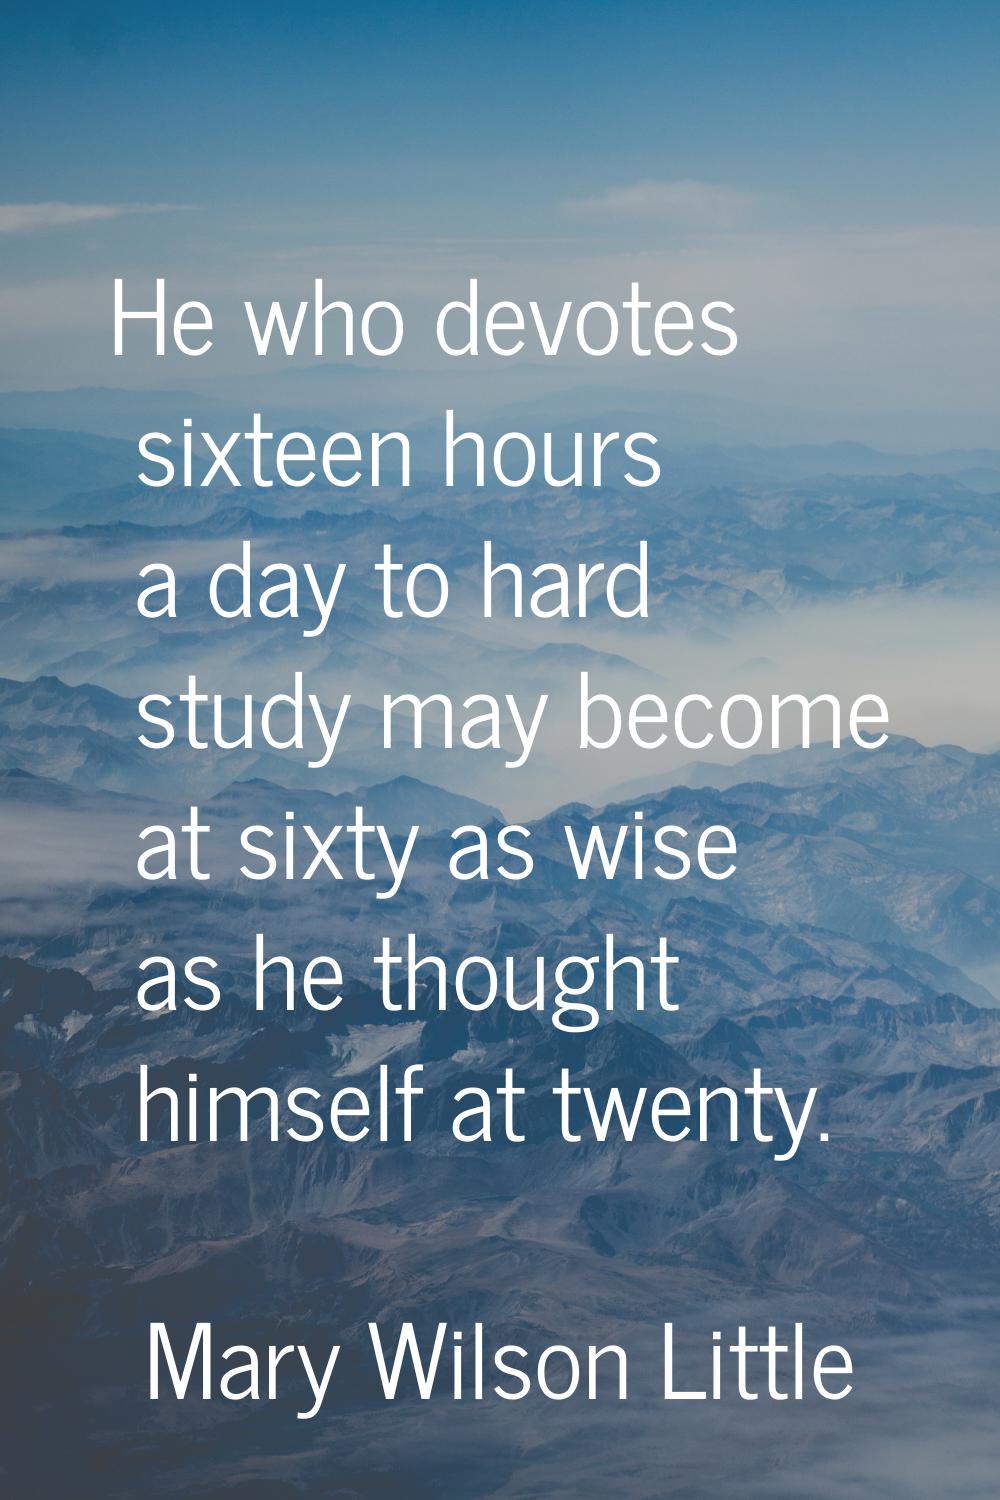 He who devotes sixteen hours a day to hard study may become at sixty as wise as he thought himself 